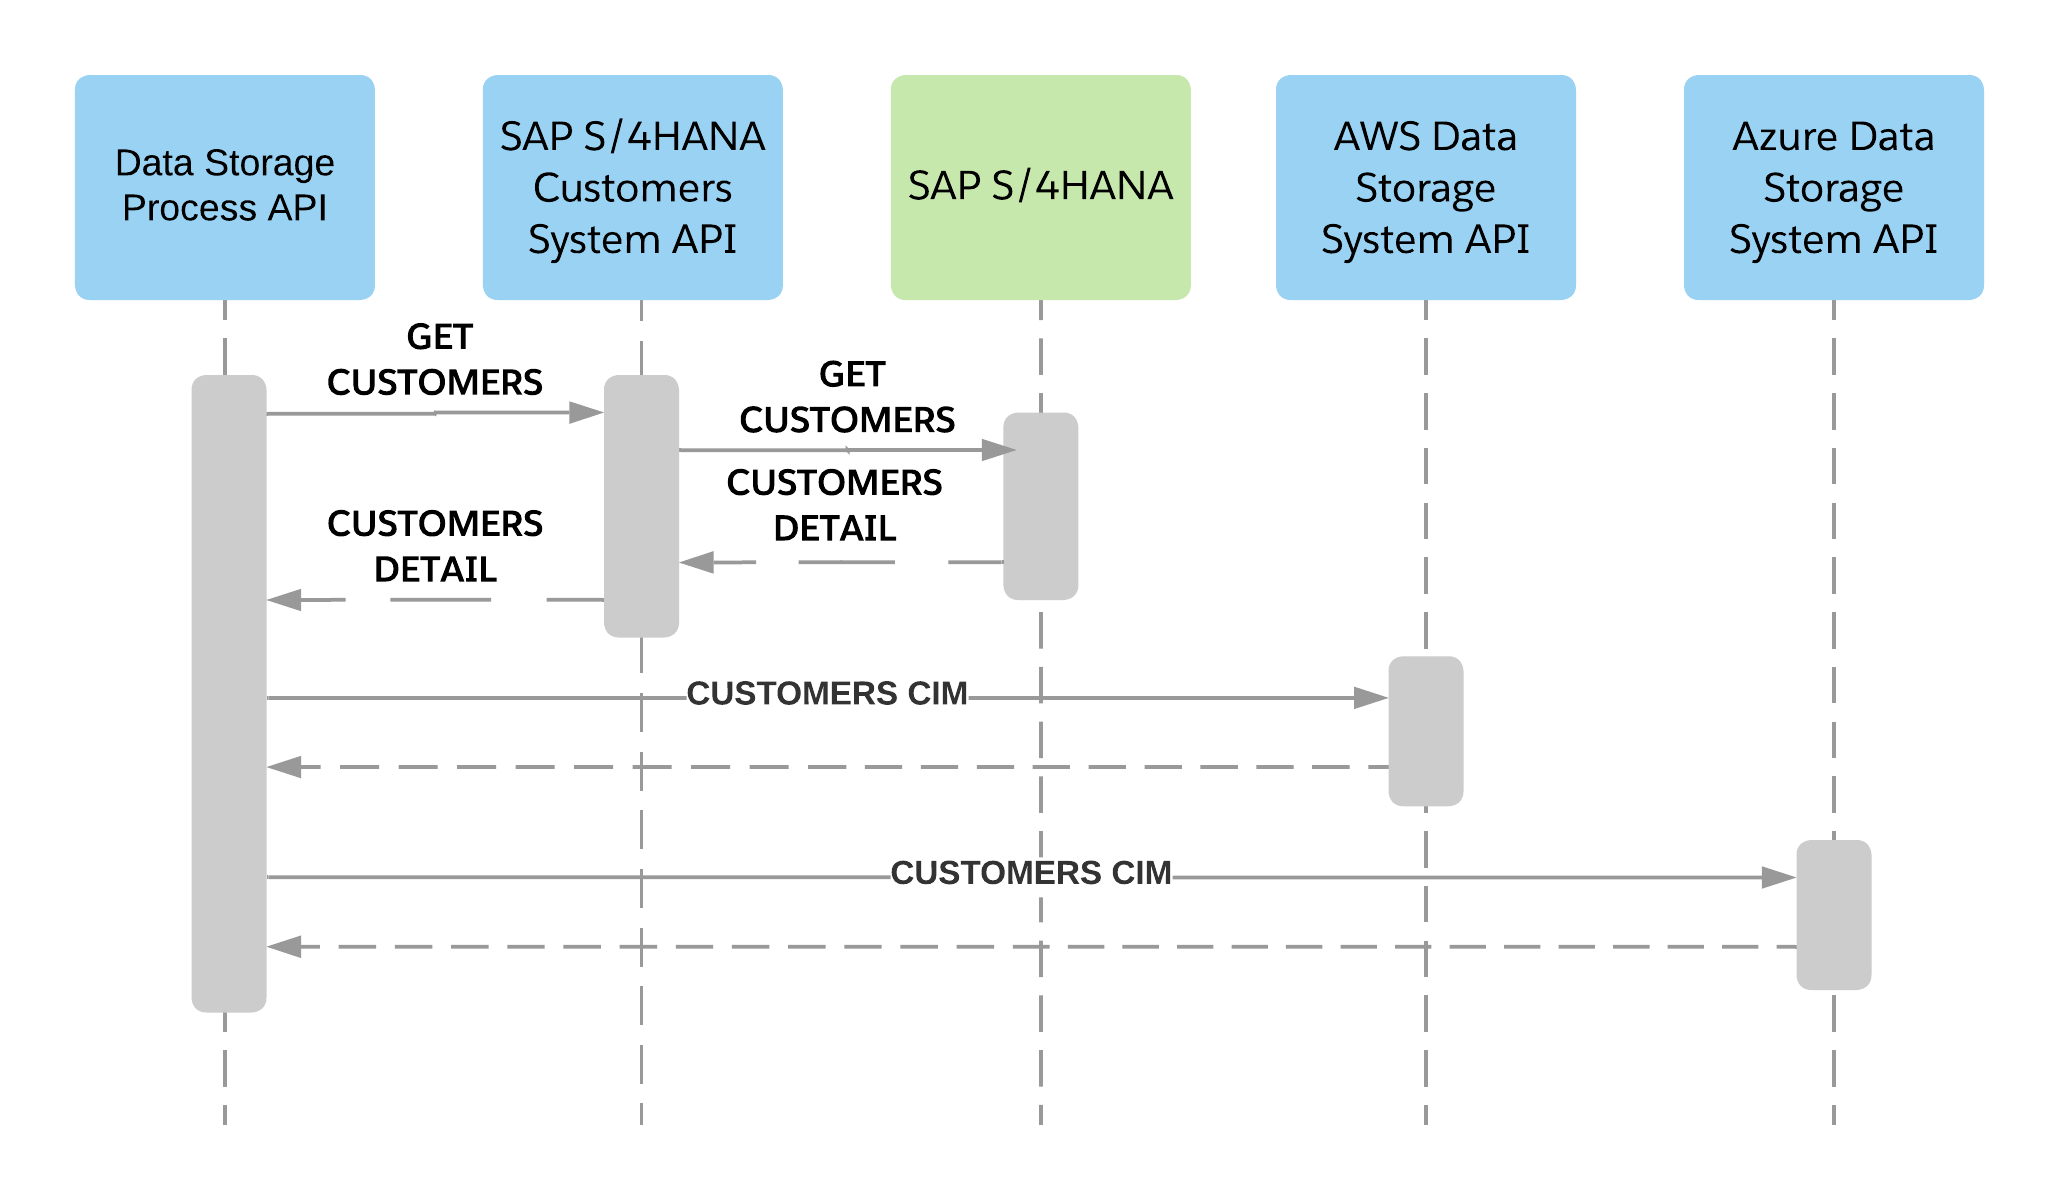 sap-datalakes-batch-sap-customers-sequence-diagram.png